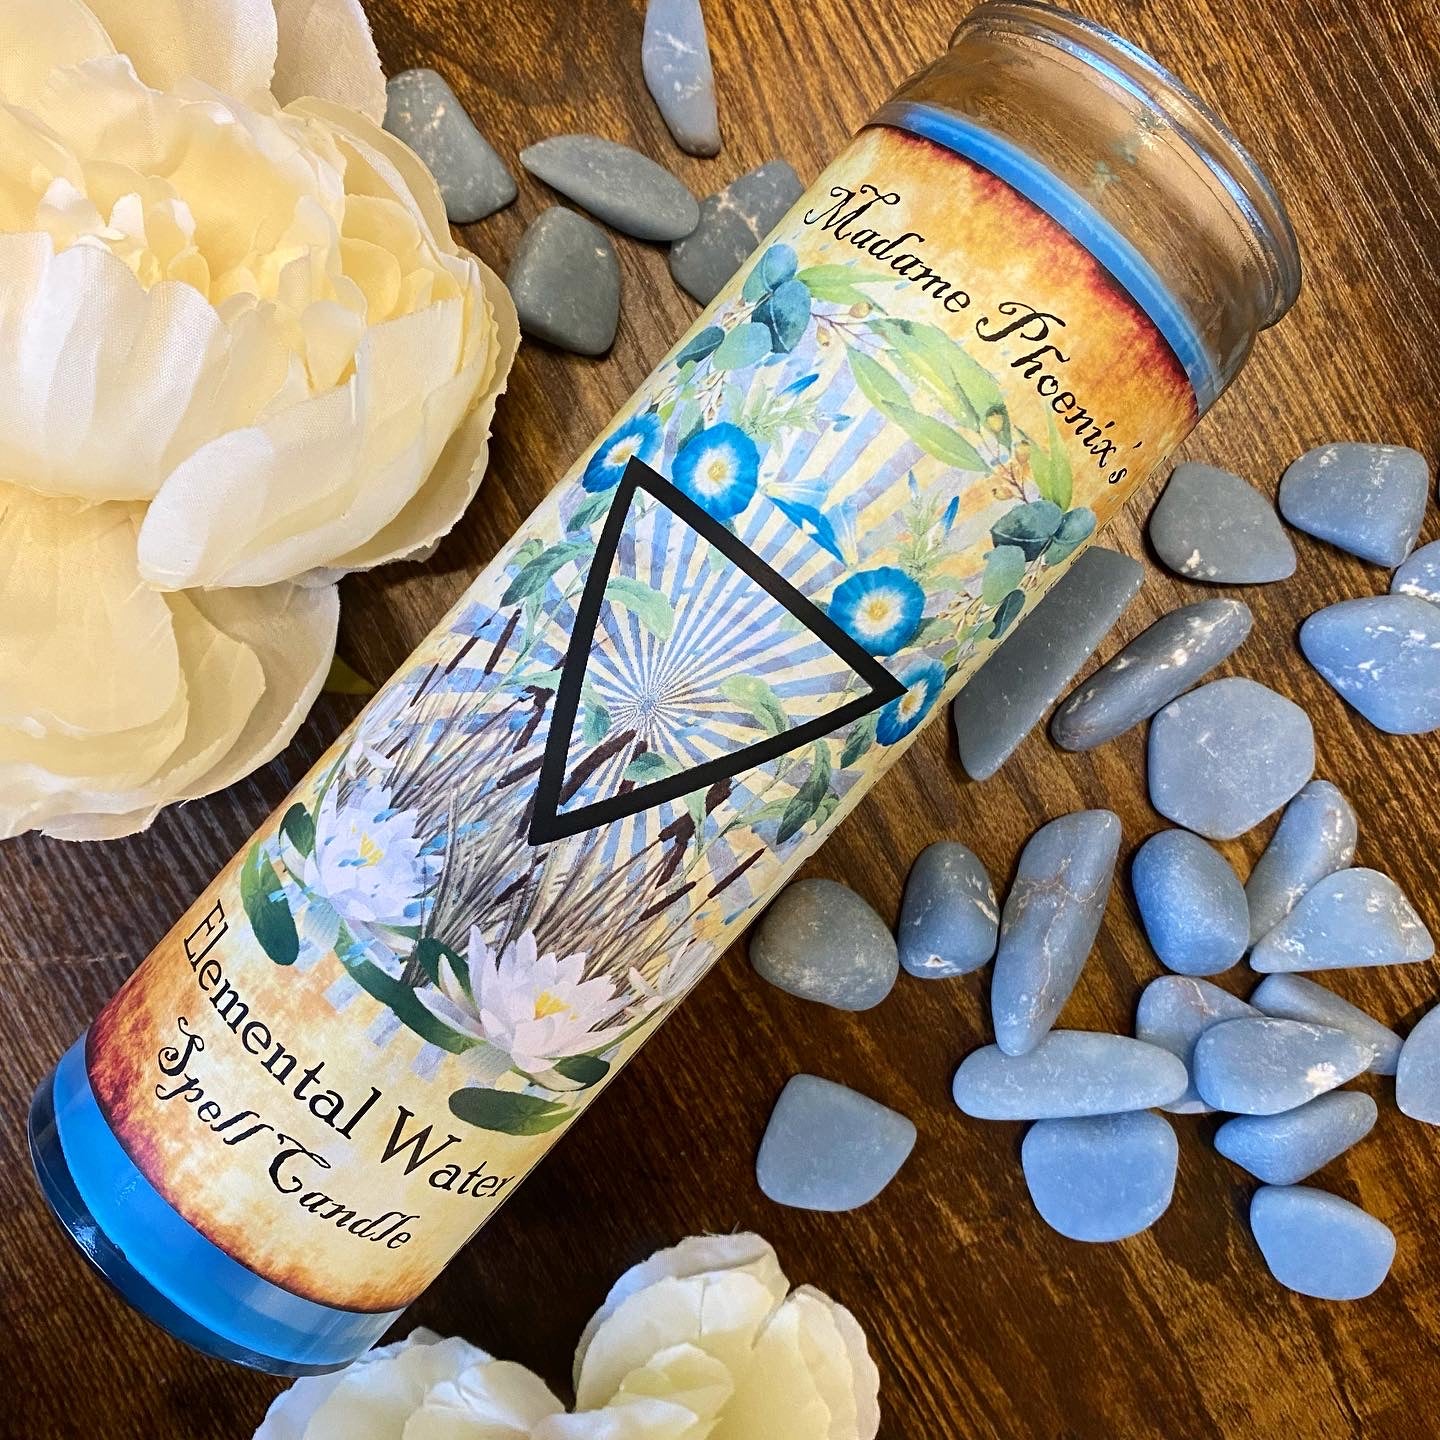 7 day style WATER Elemental Magic Spell Candles